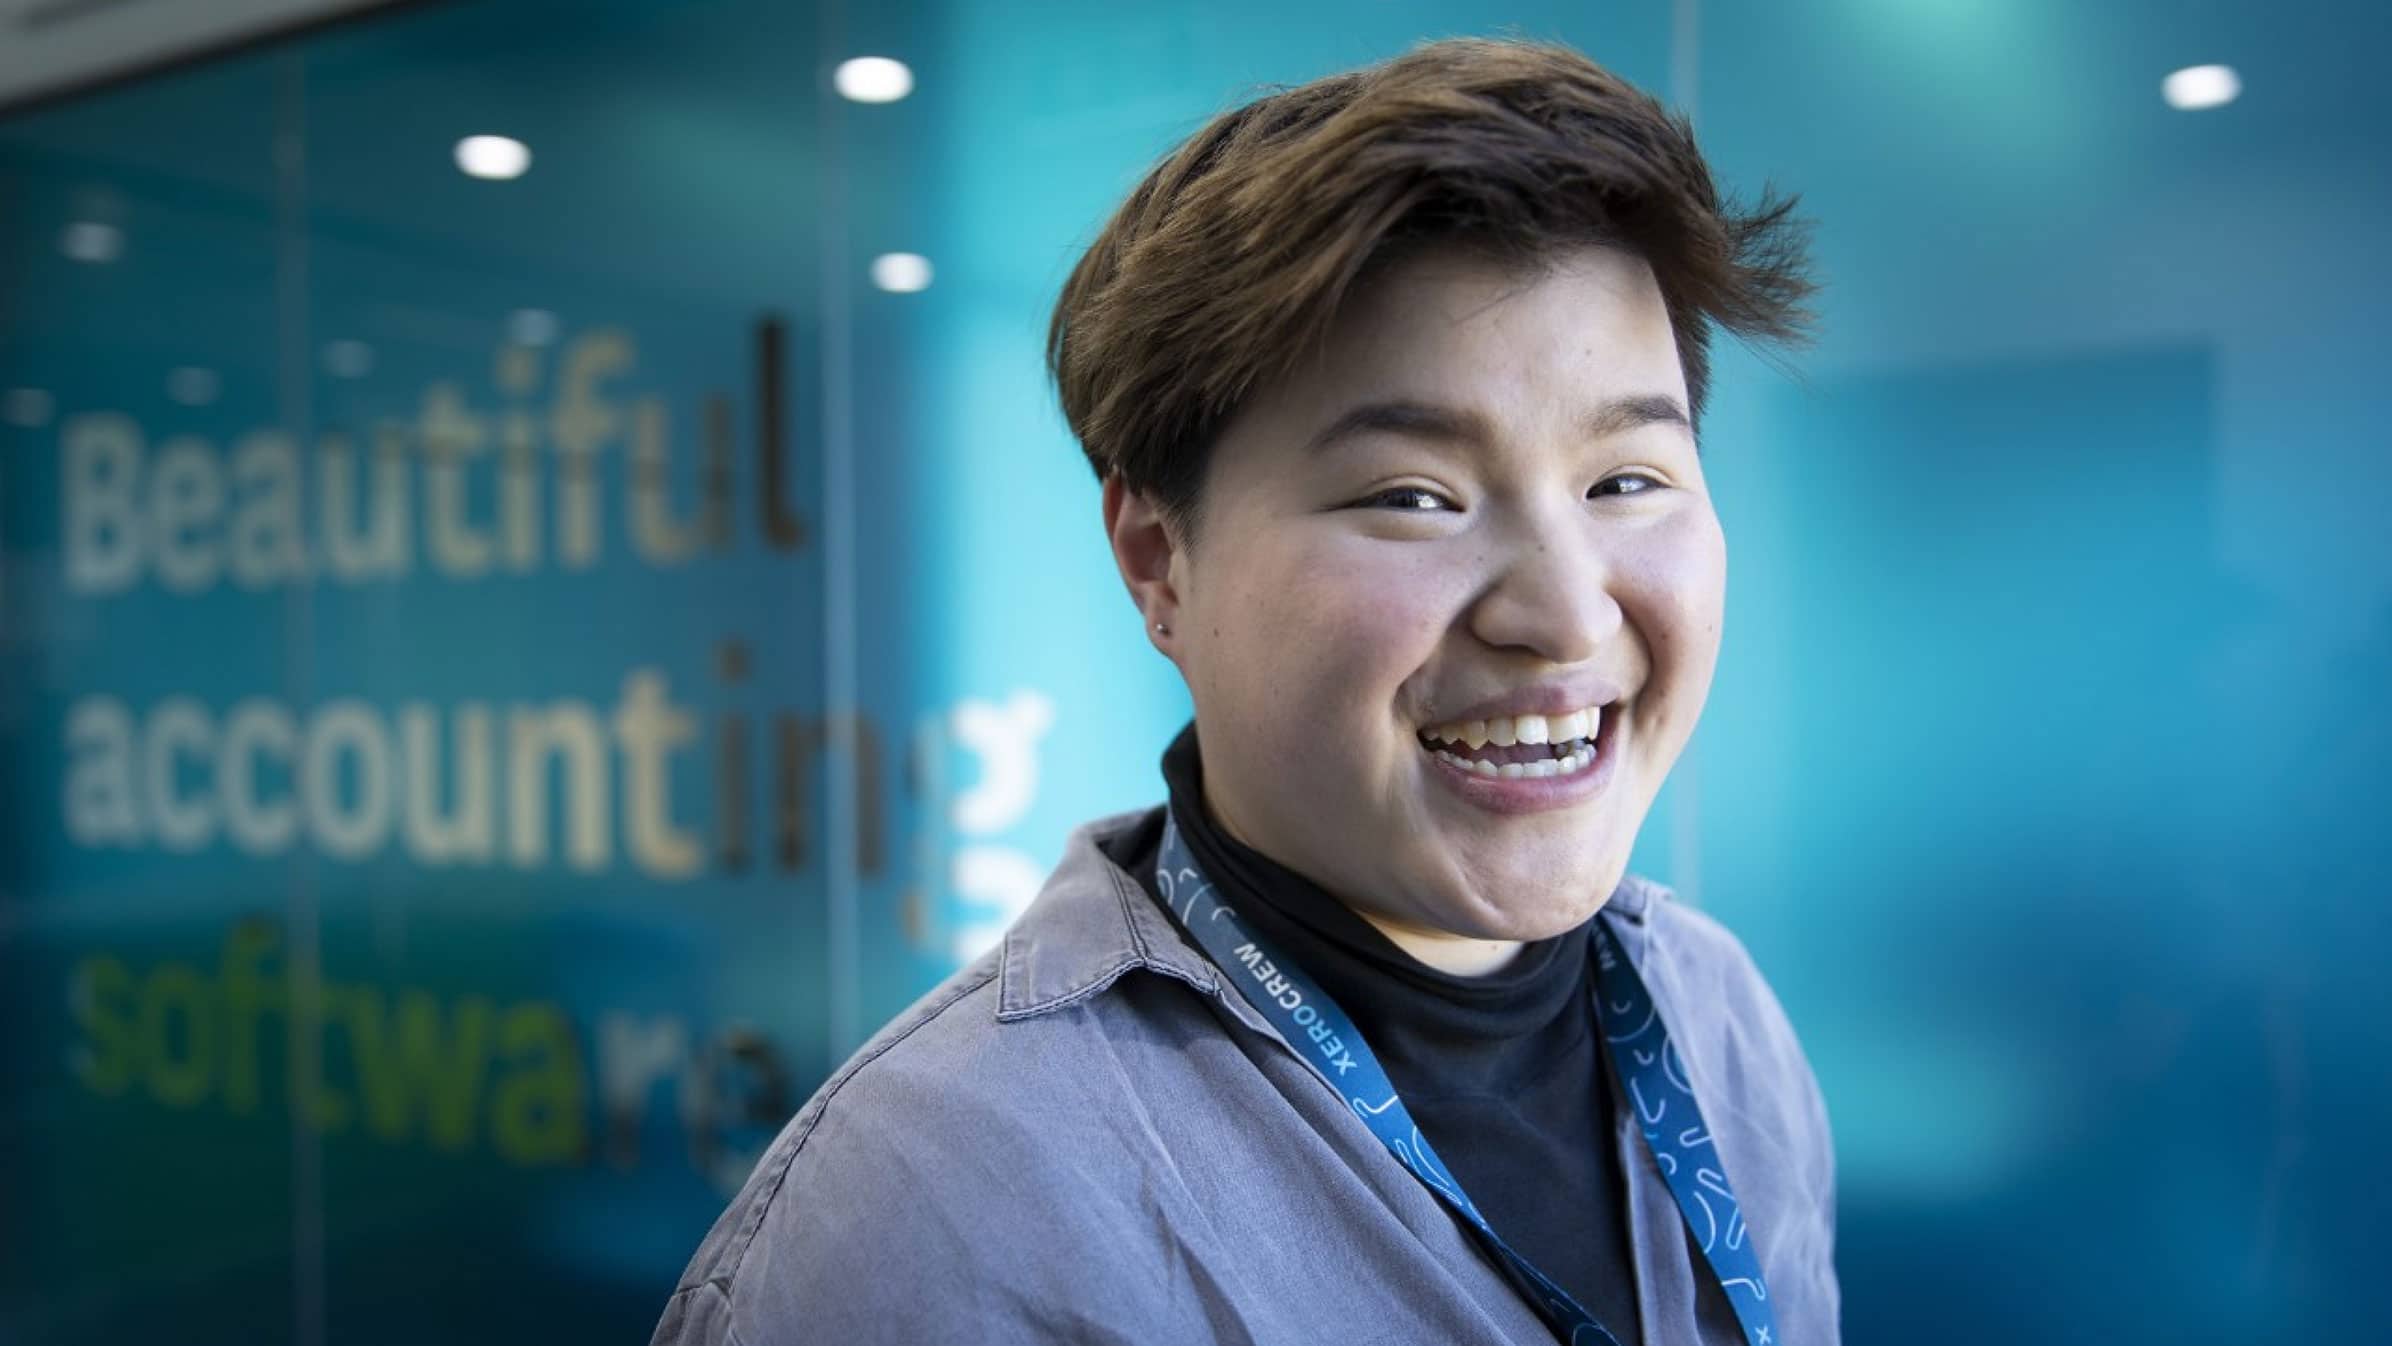 Grace Tai, a product designer at Xero, is all smiles in front of blue doors that say ‘Beautiful accounting software’.